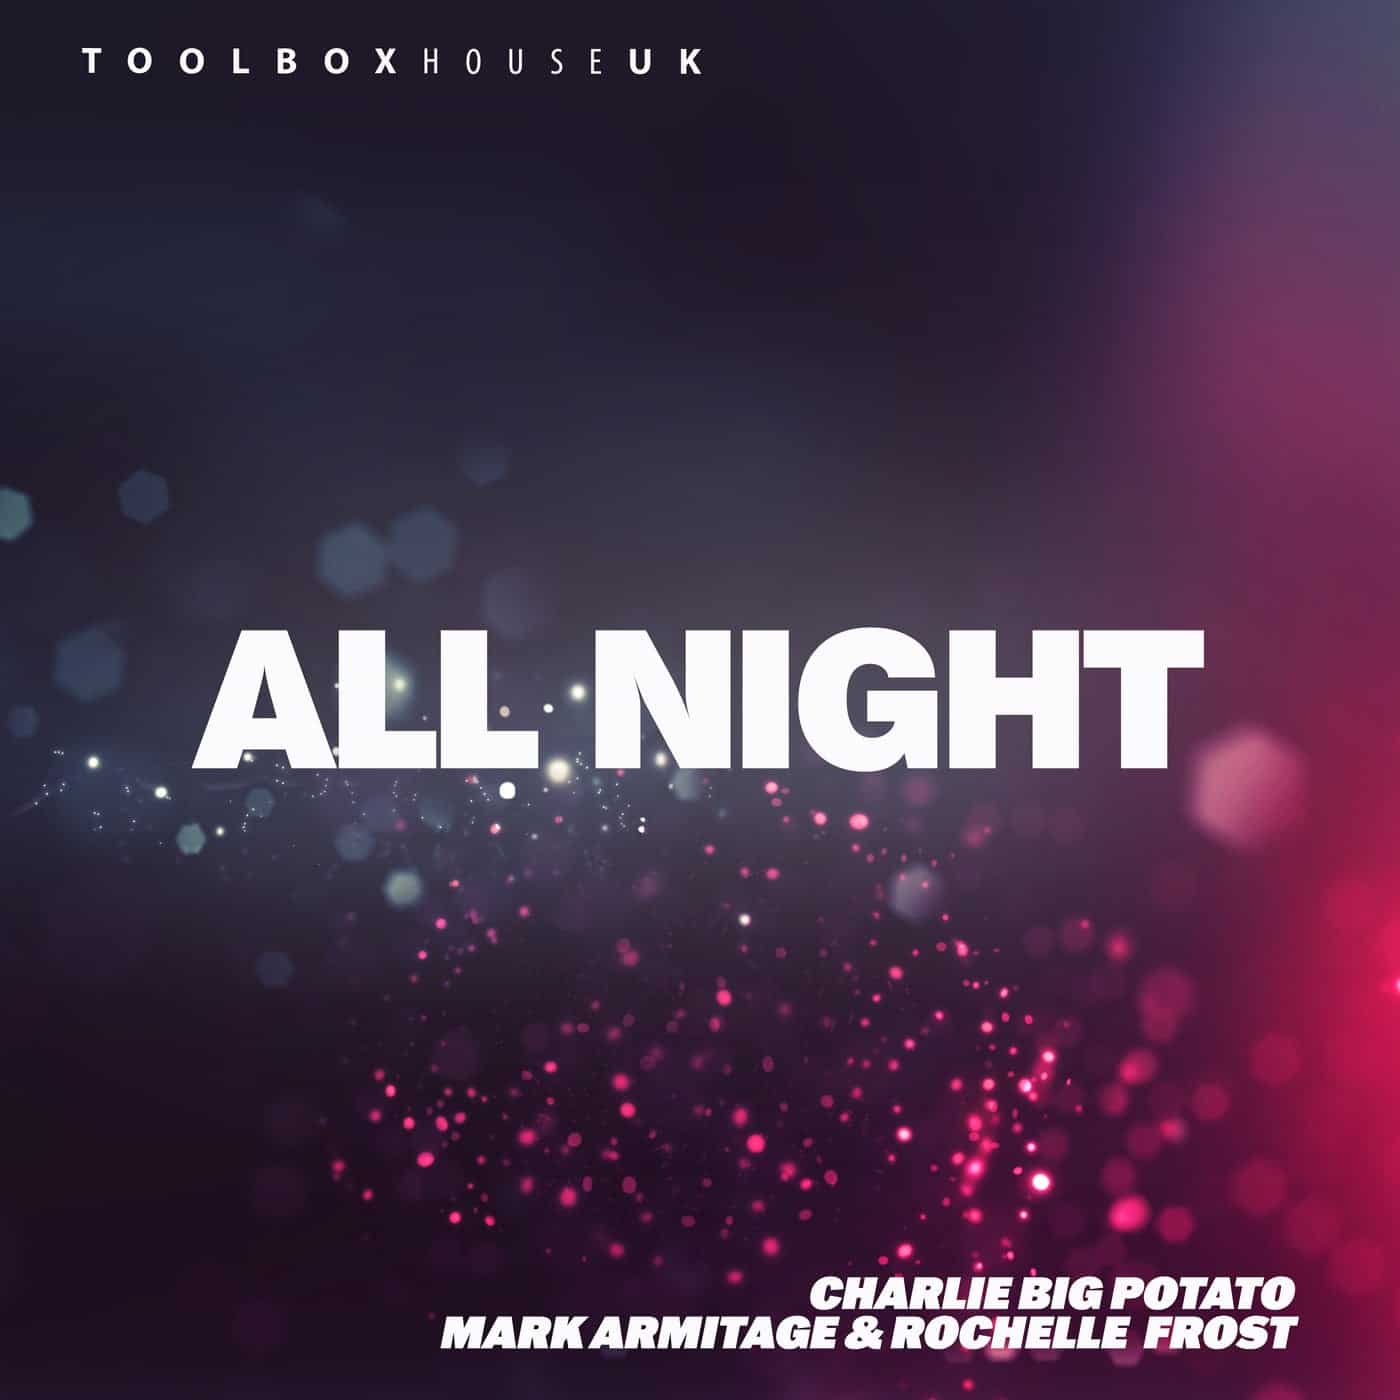 image cover: Mark Armitage, Charlie Big Potato, Rochelle Frost - All Night on ToolBox House